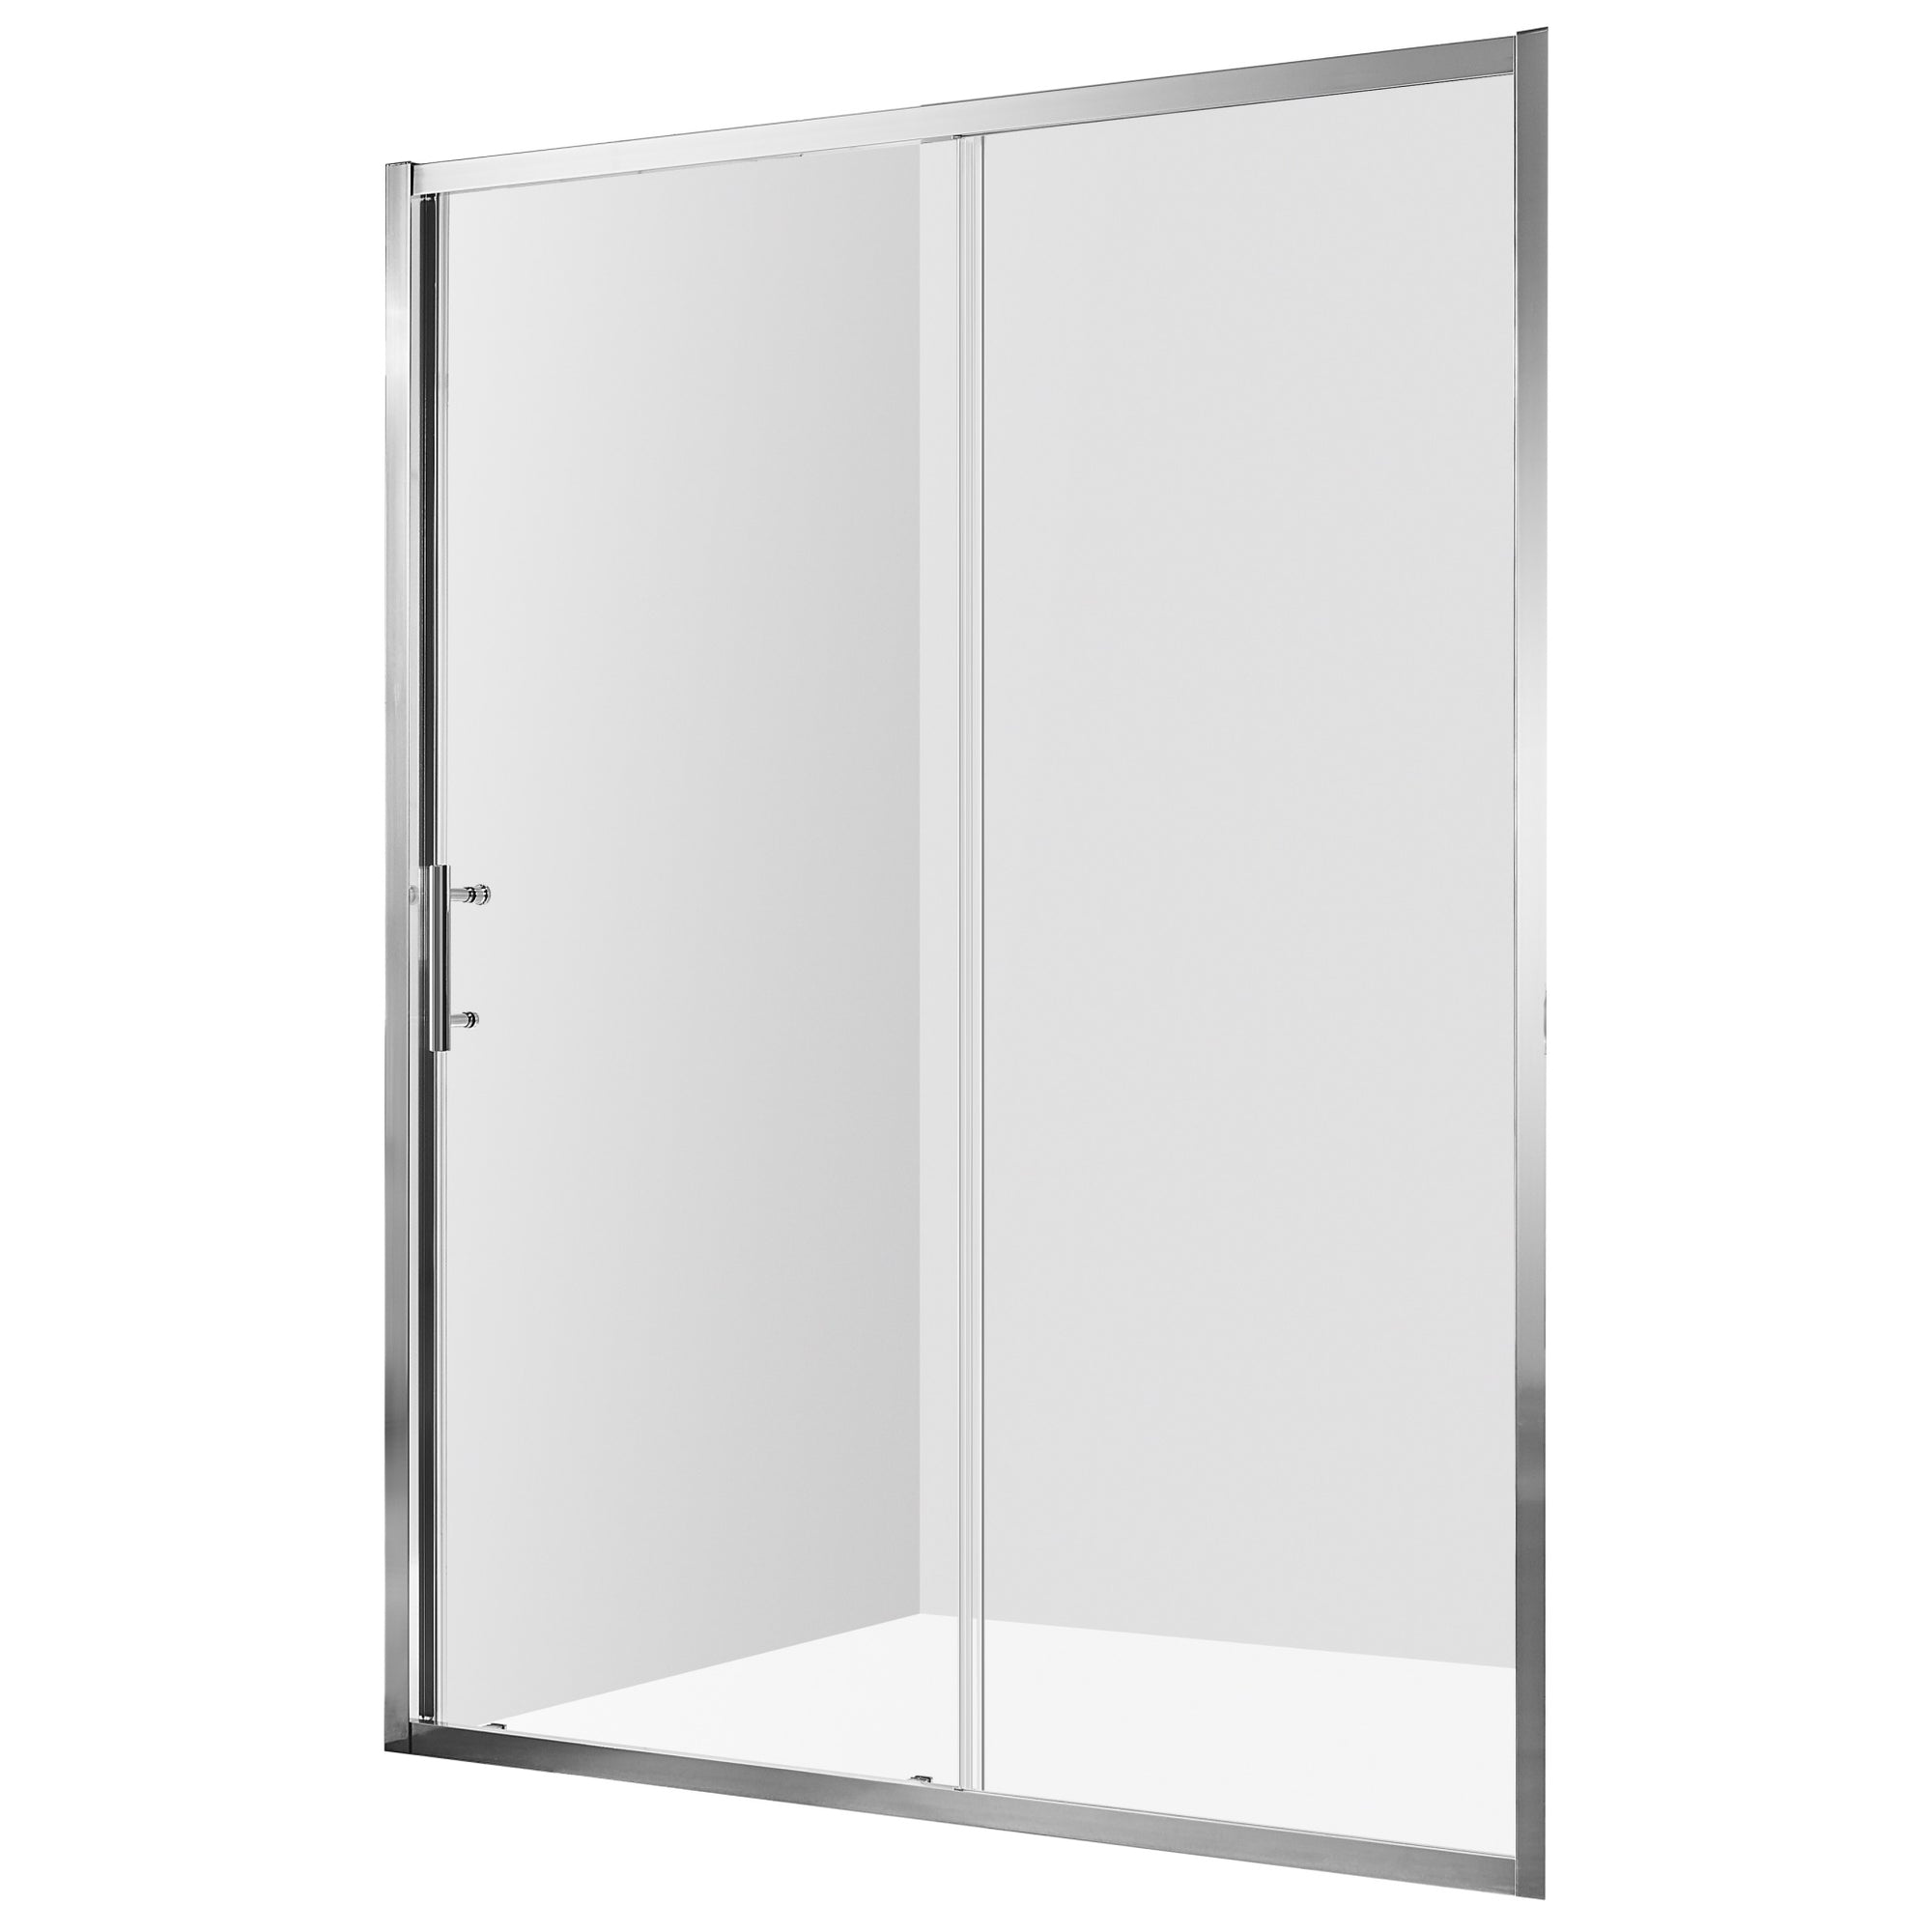 Anzzi Halberd 48 in. x 72 in. Framed Shower Door with Tsunami Guard - Tempered Glass - Marine Grade Aluminum Alloy Frame - Brushed Nickel - SD-AZ052-01 - Vital Hydrotherapy